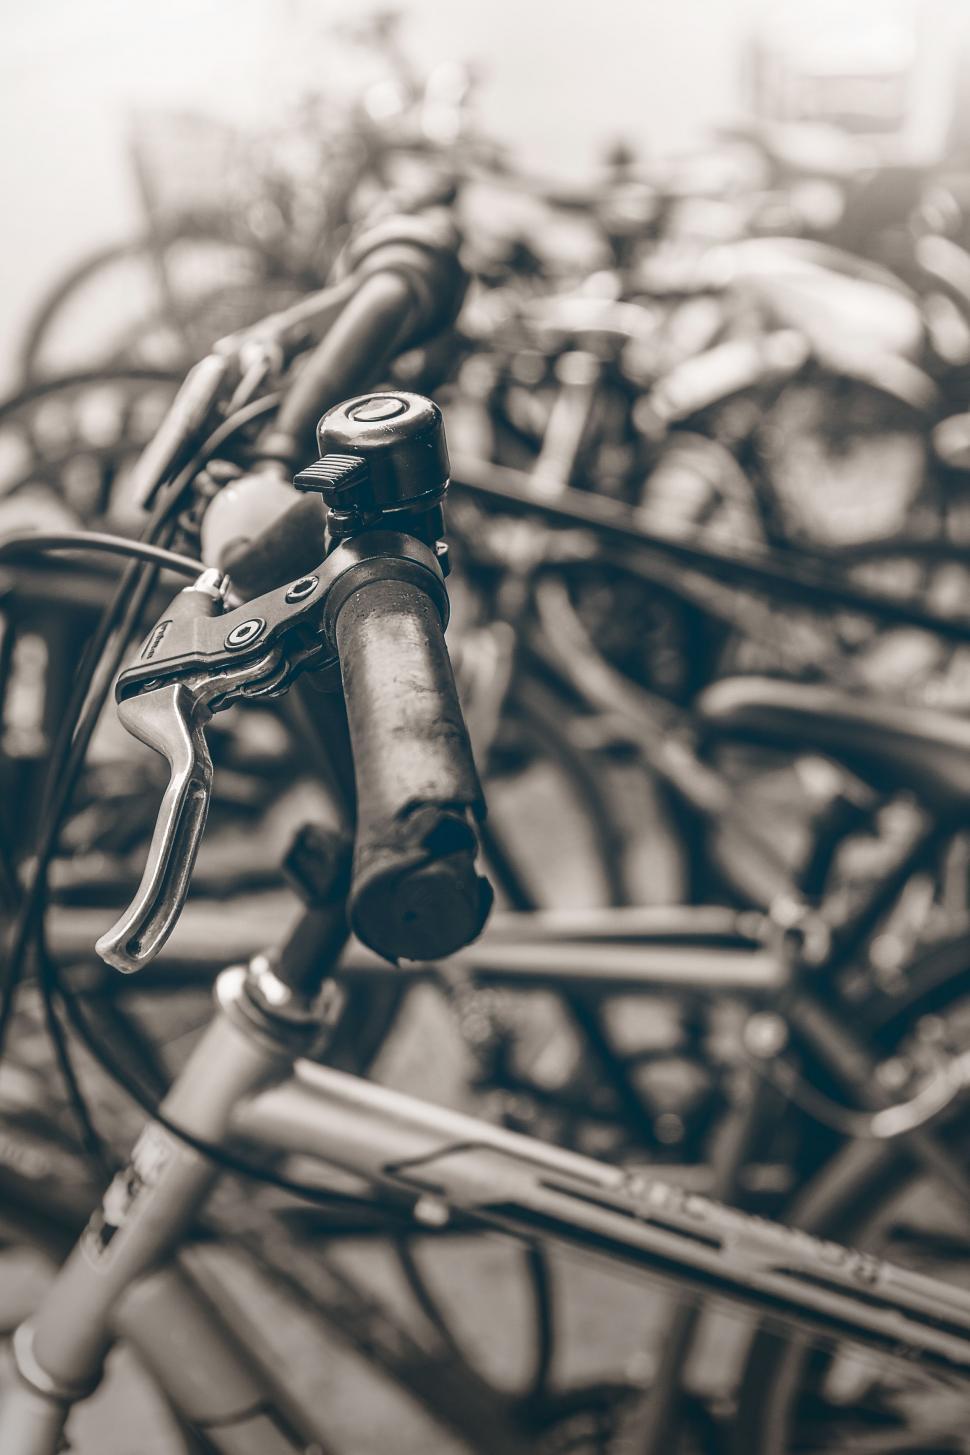 Free Image of Bunch of Bikes Parked Next to Each Other 